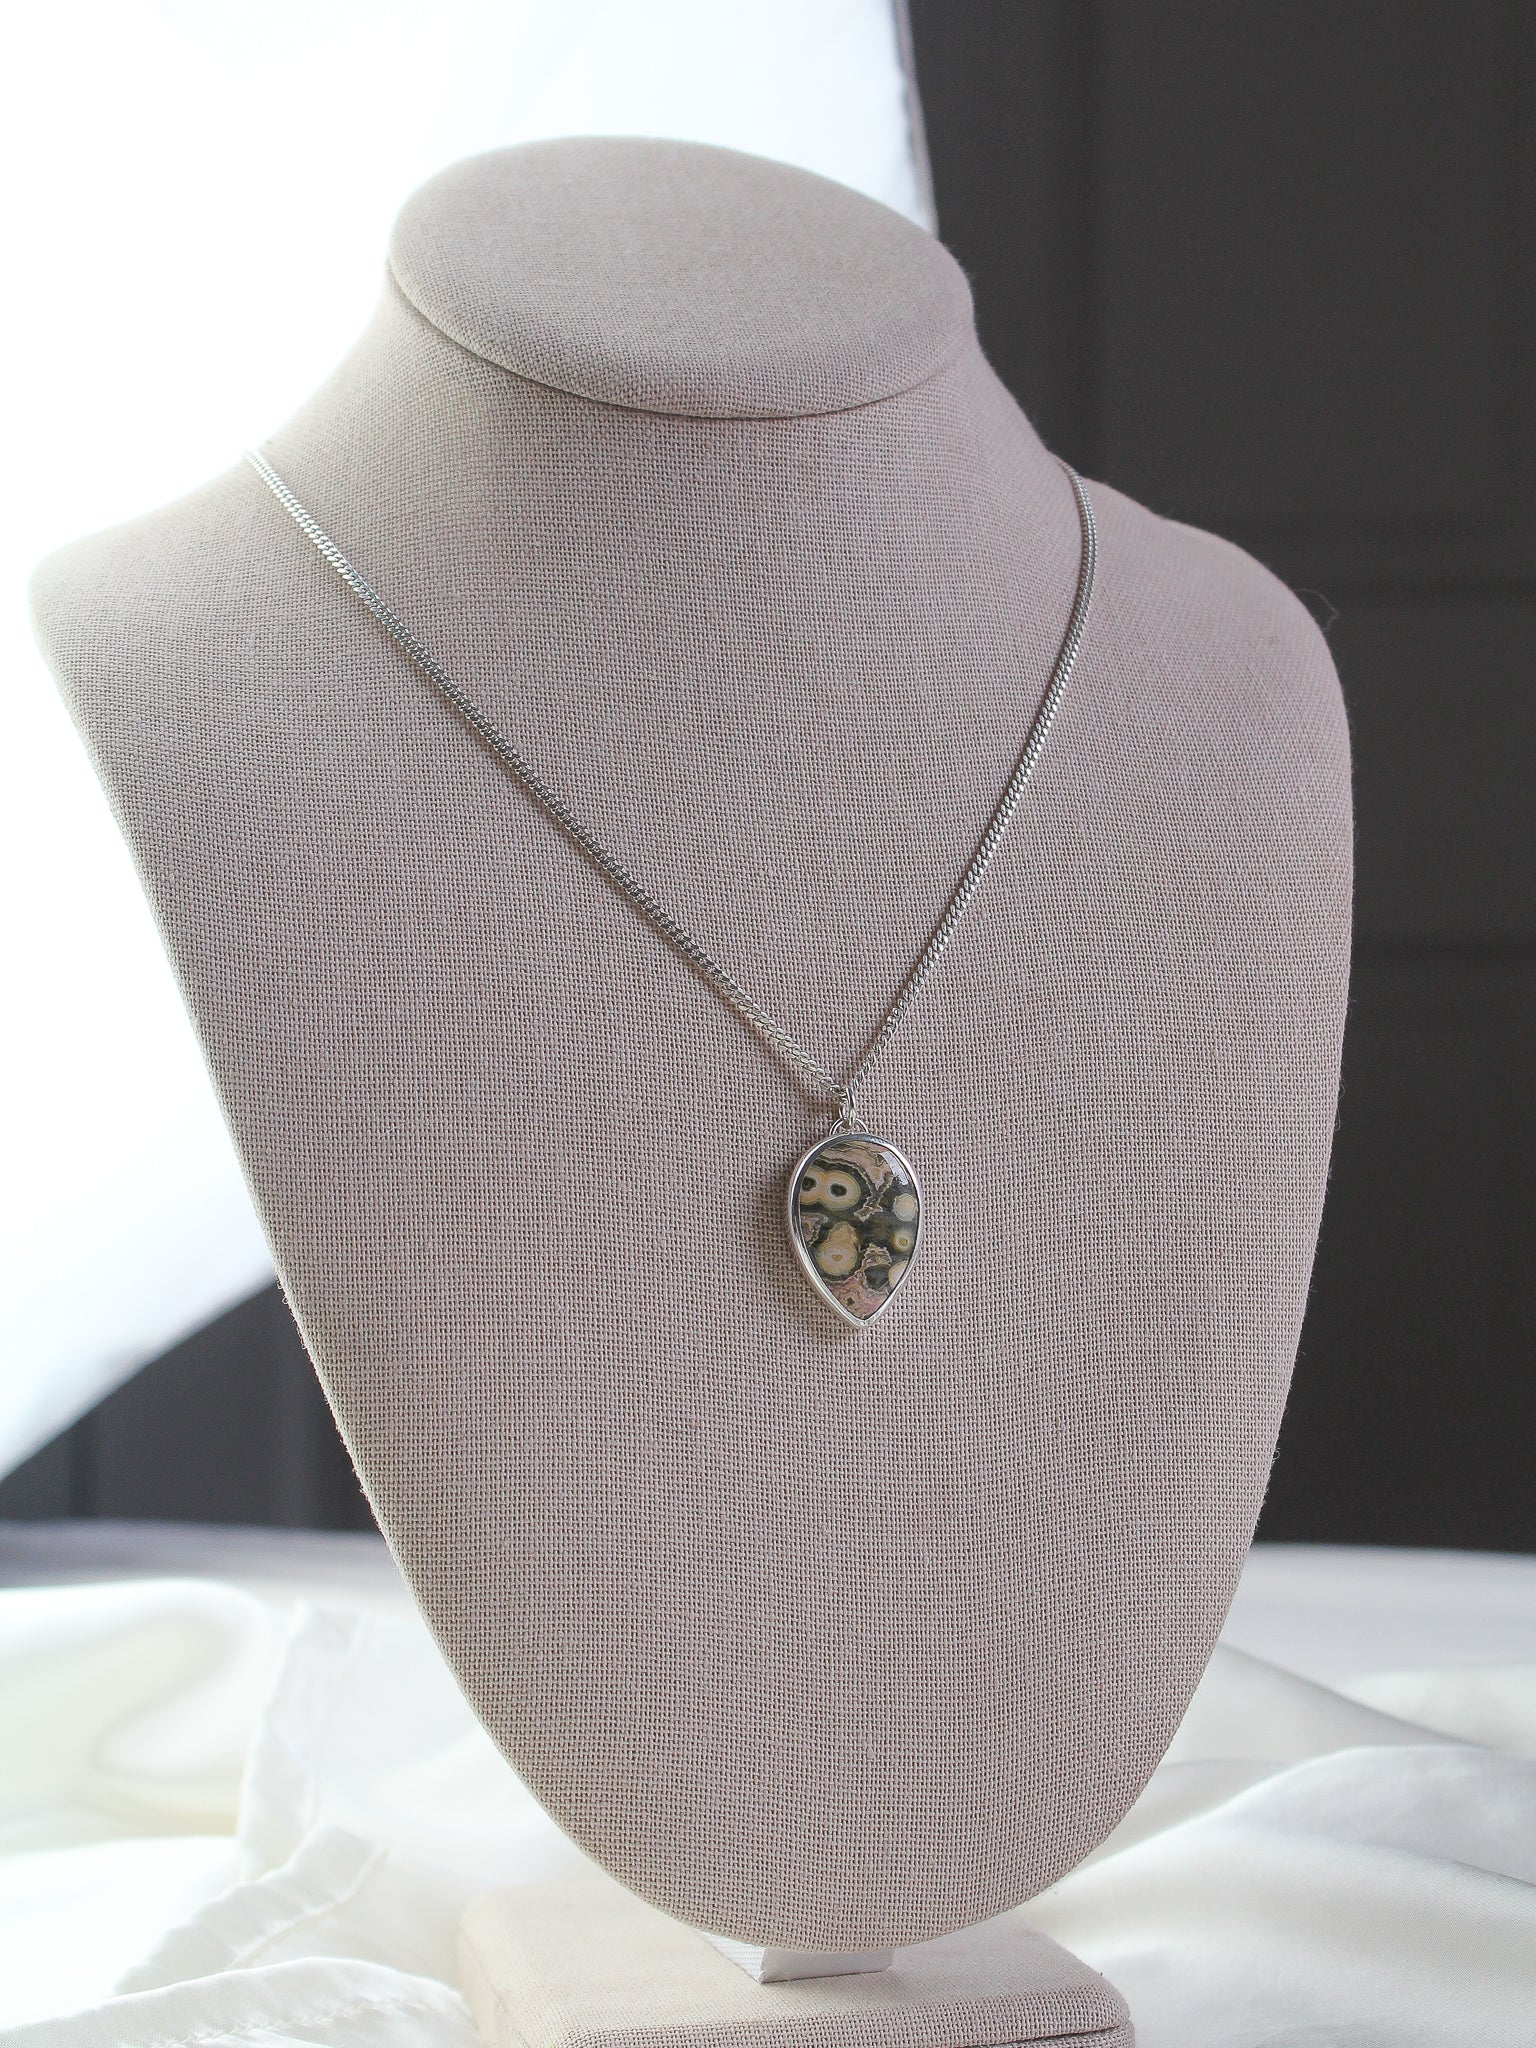 Handmade 925 sterling silver pendant with ocean jasper stone lily and William jewelry affordable